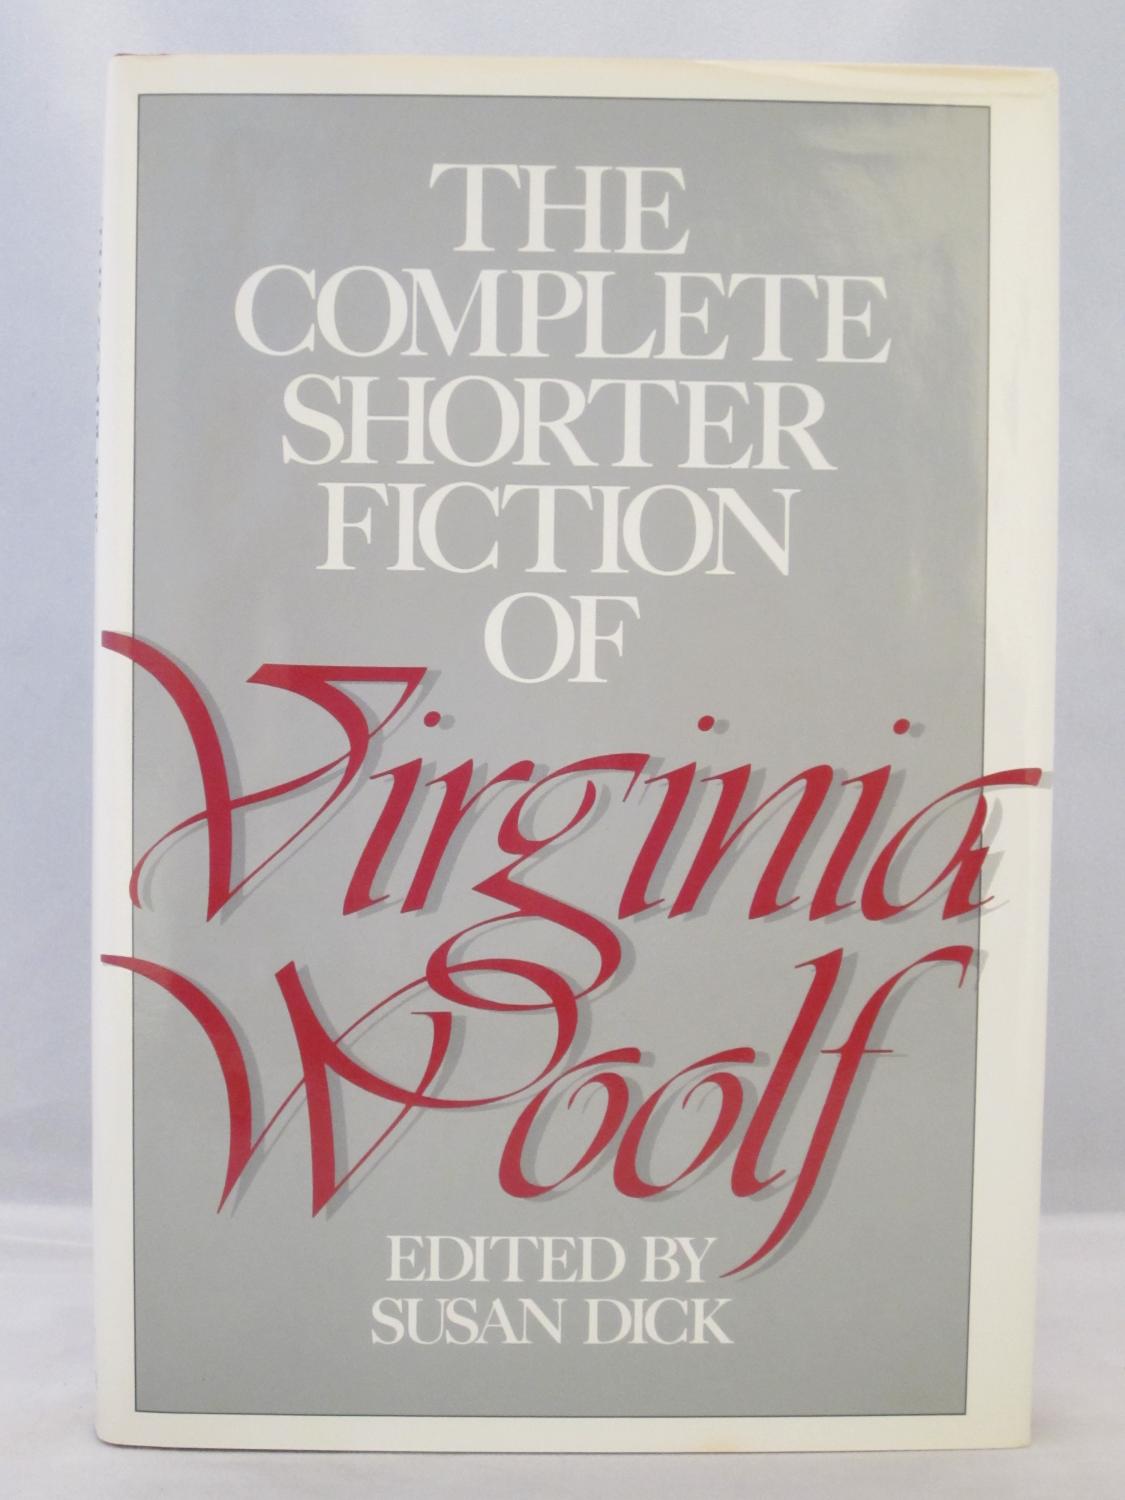 The Complete Shorter Fiction of Virginia Woolf: Second Edition (1989)